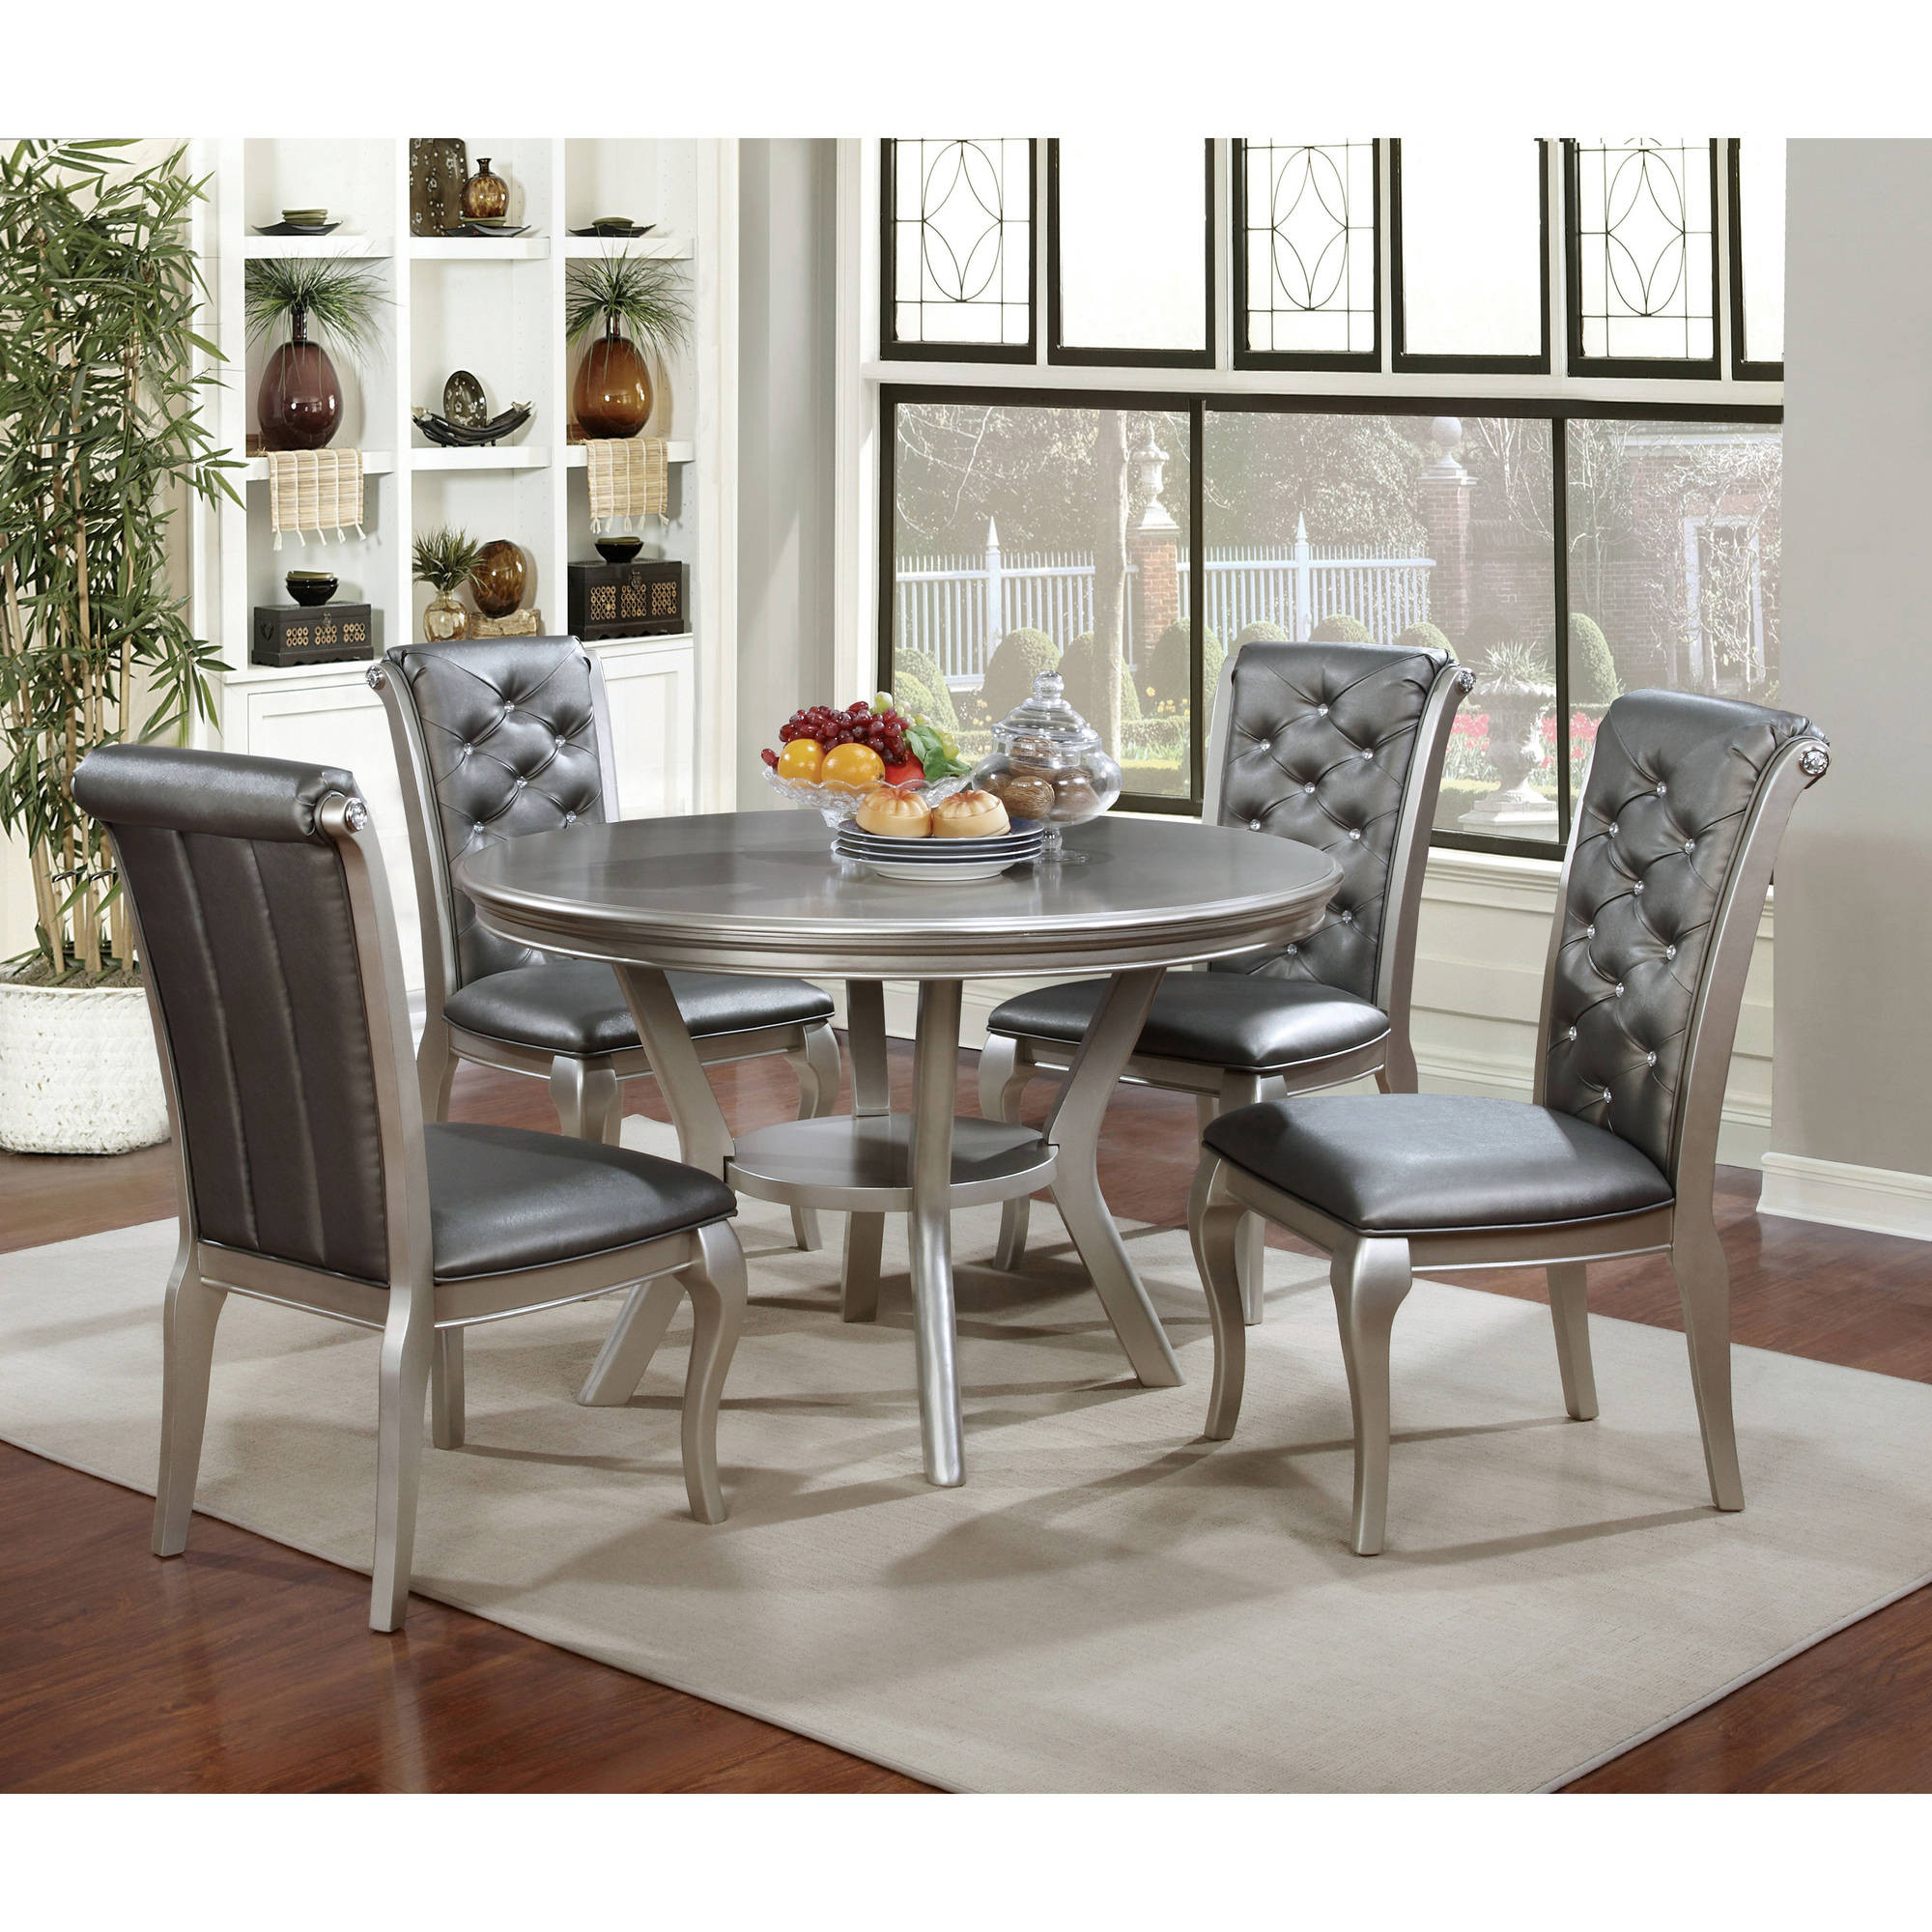 Modern Kitchen Table And Chairs
 Furniture of America Contemporary Round 5 Piece Dining Set